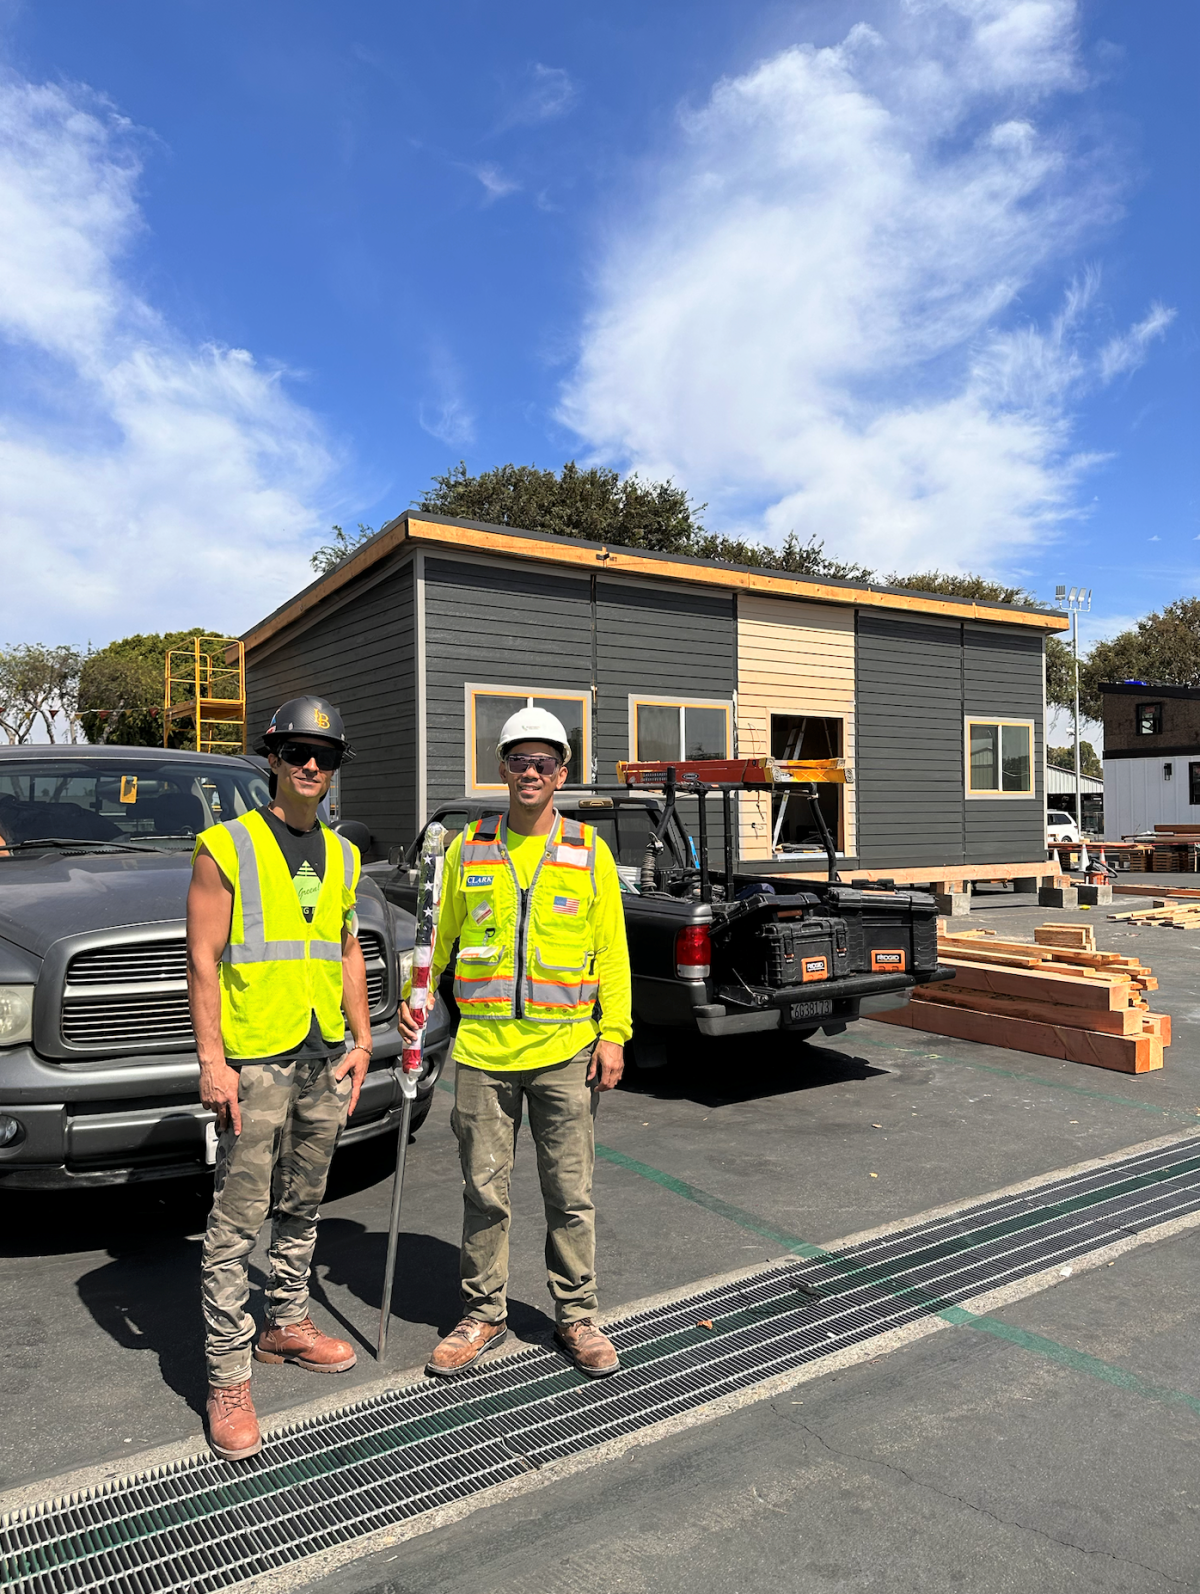 A build team from CSU Long Beach poses in front of a sustainable model home.